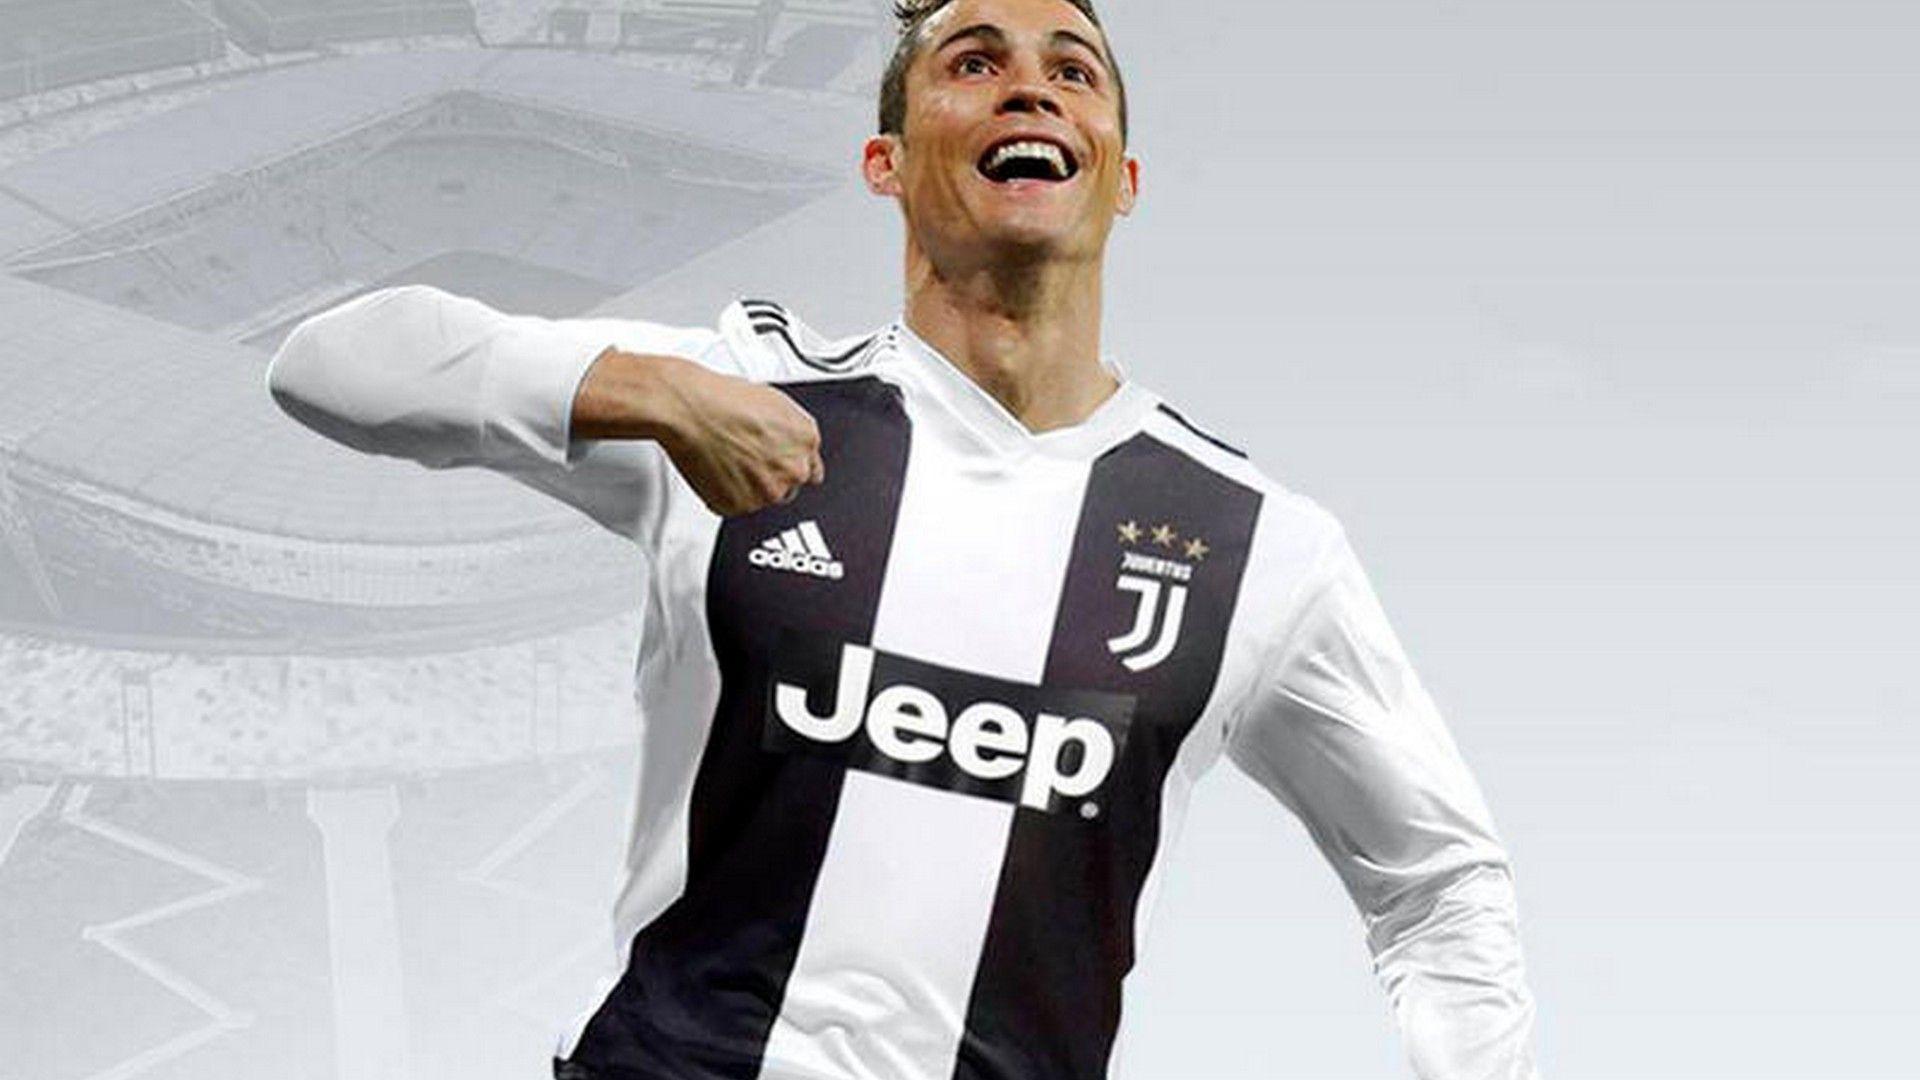 CR7 Computer Wallpapers - Top Free CR7 Computer Backgrounds ...